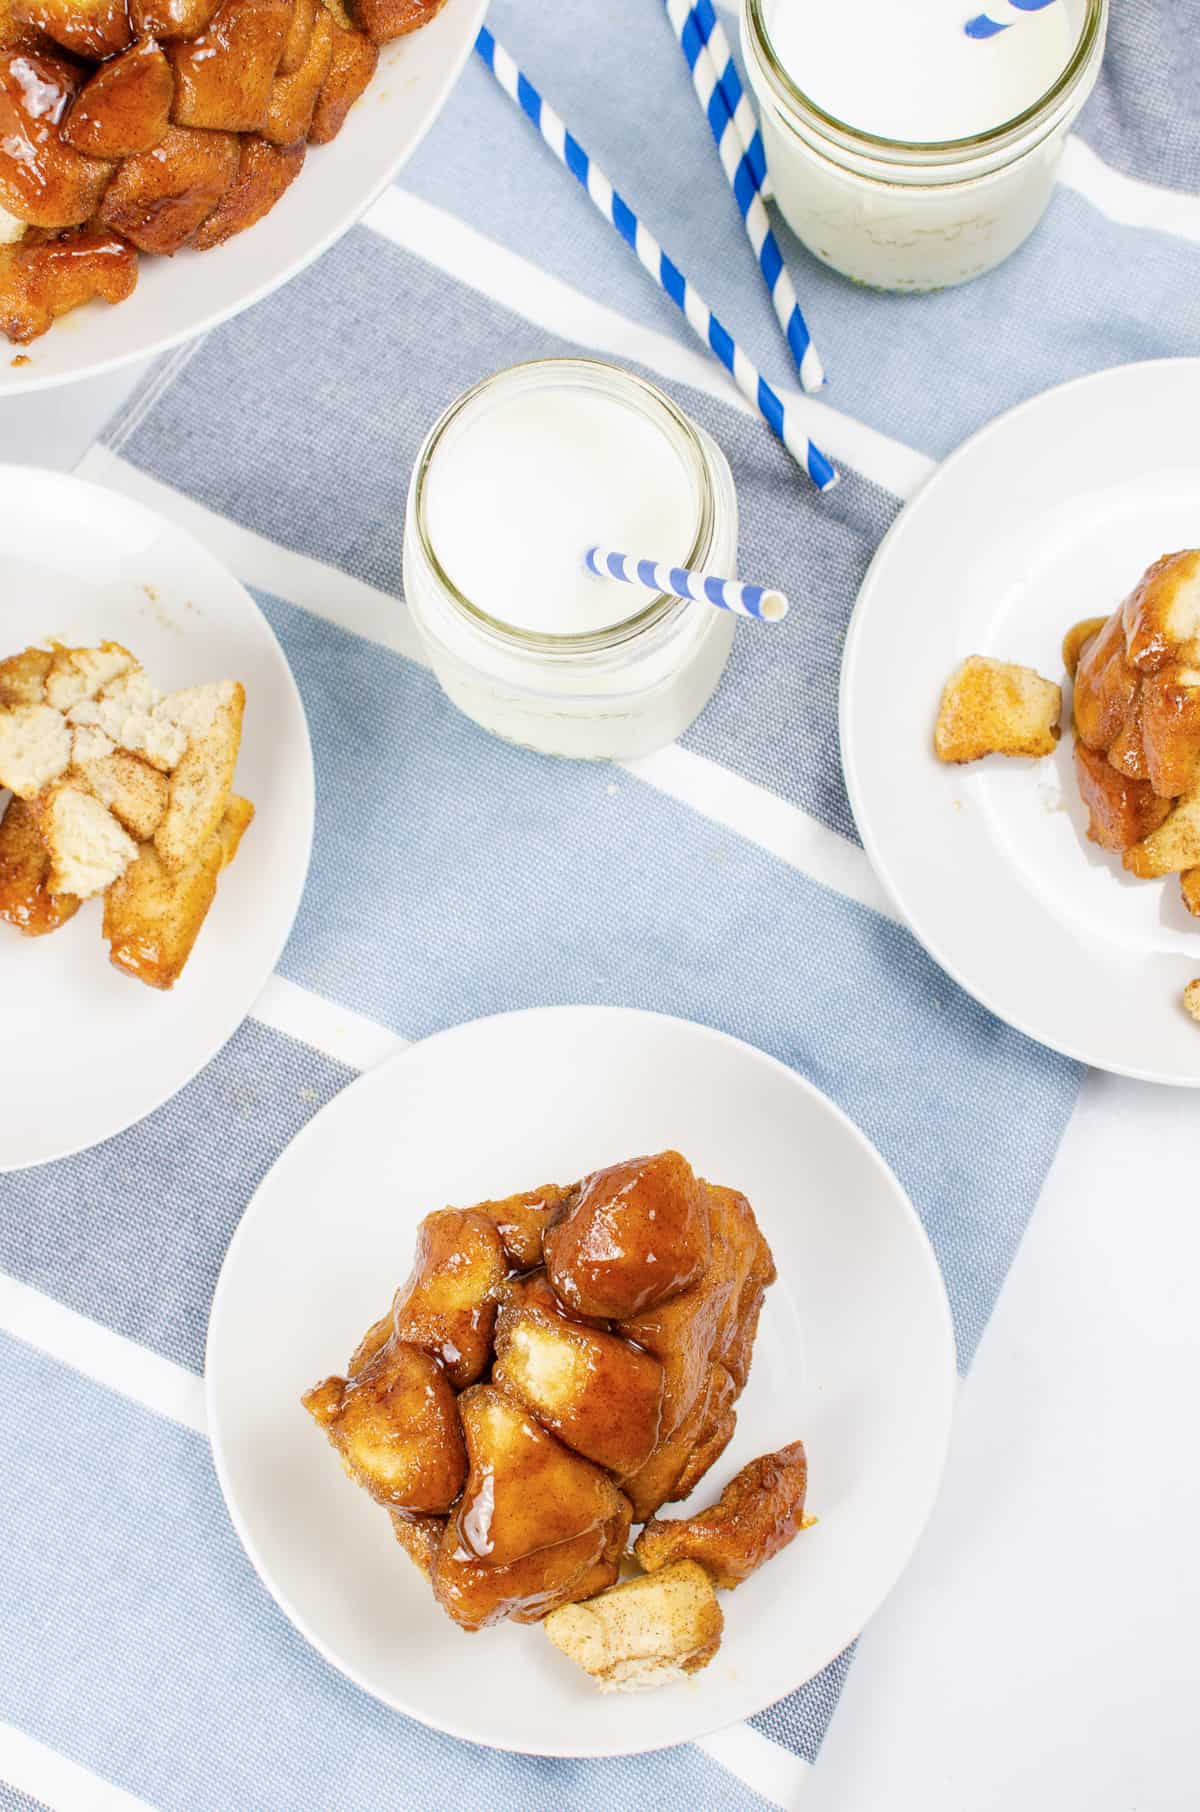 Monkey bread with biscuit dough on white plates with glasses of milk